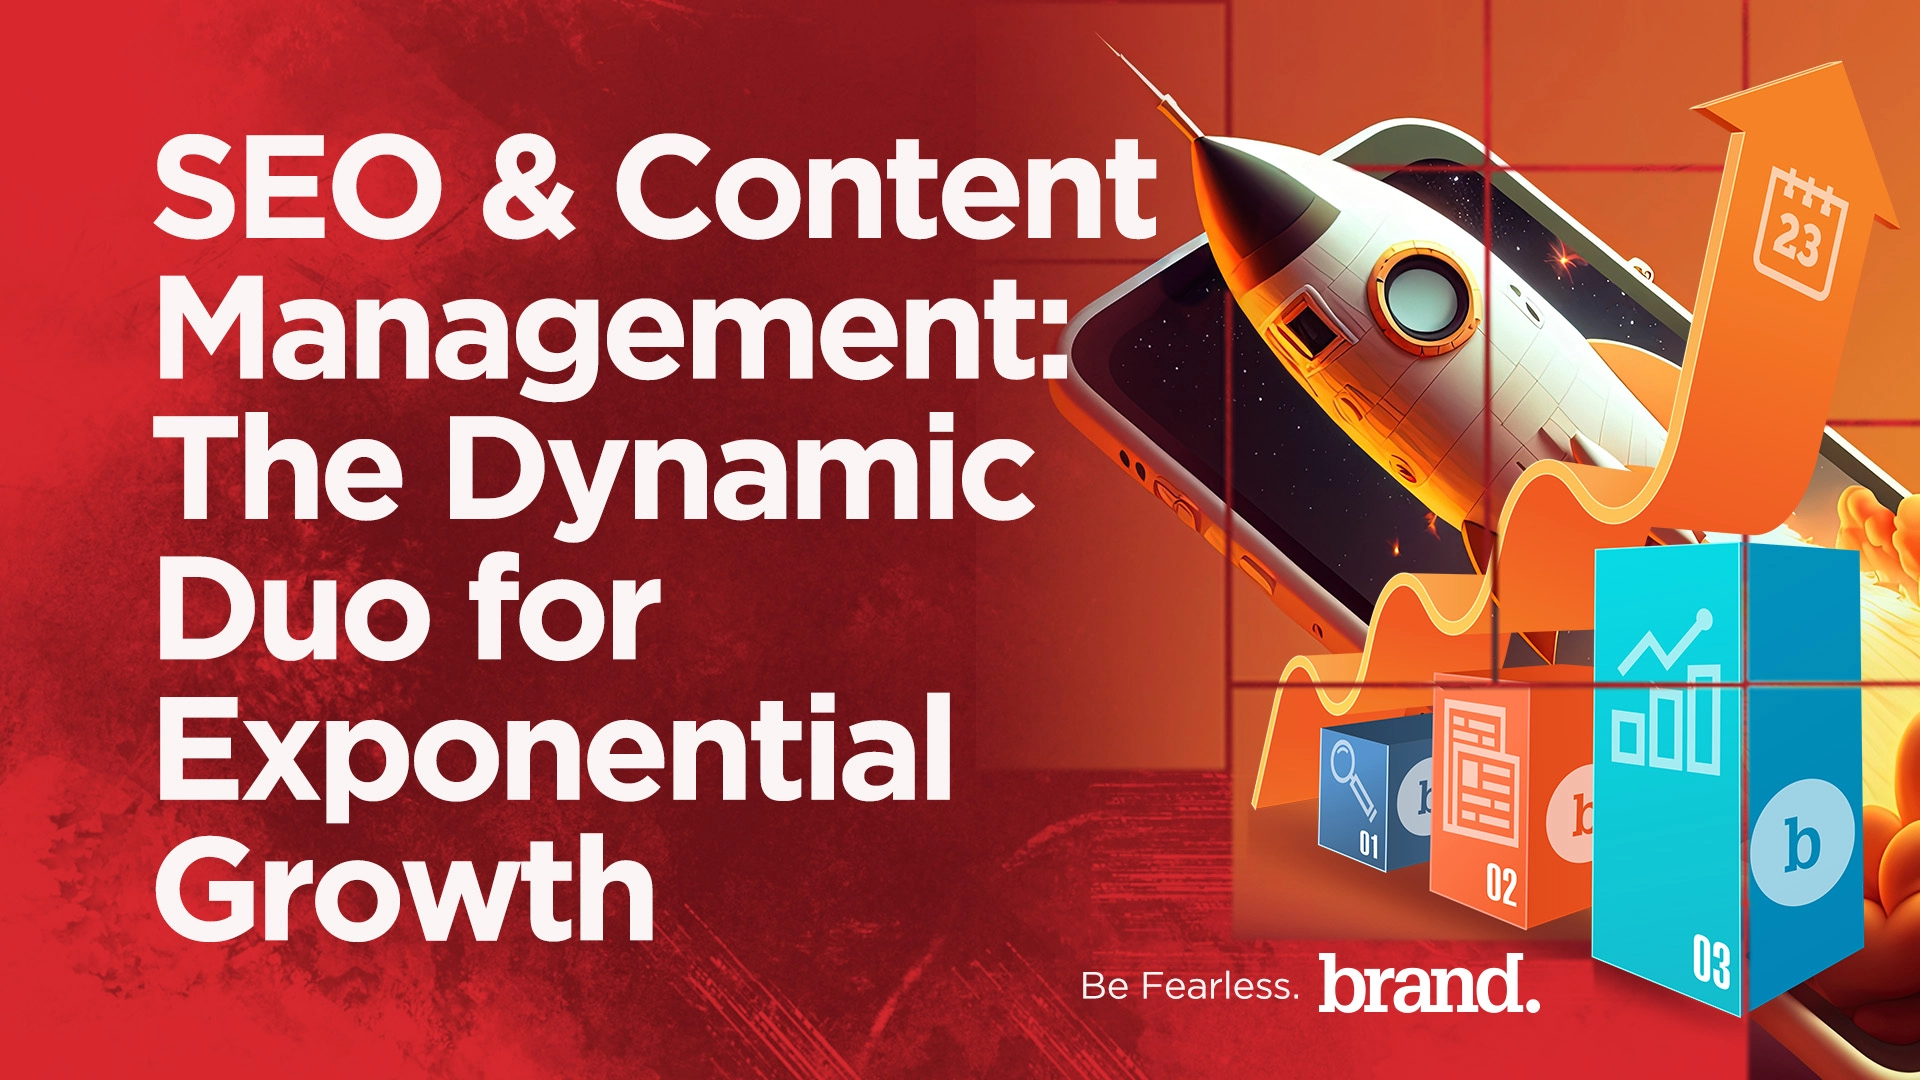 SEO & Content Marketing: The Dynamic Duo for Exponential Growth